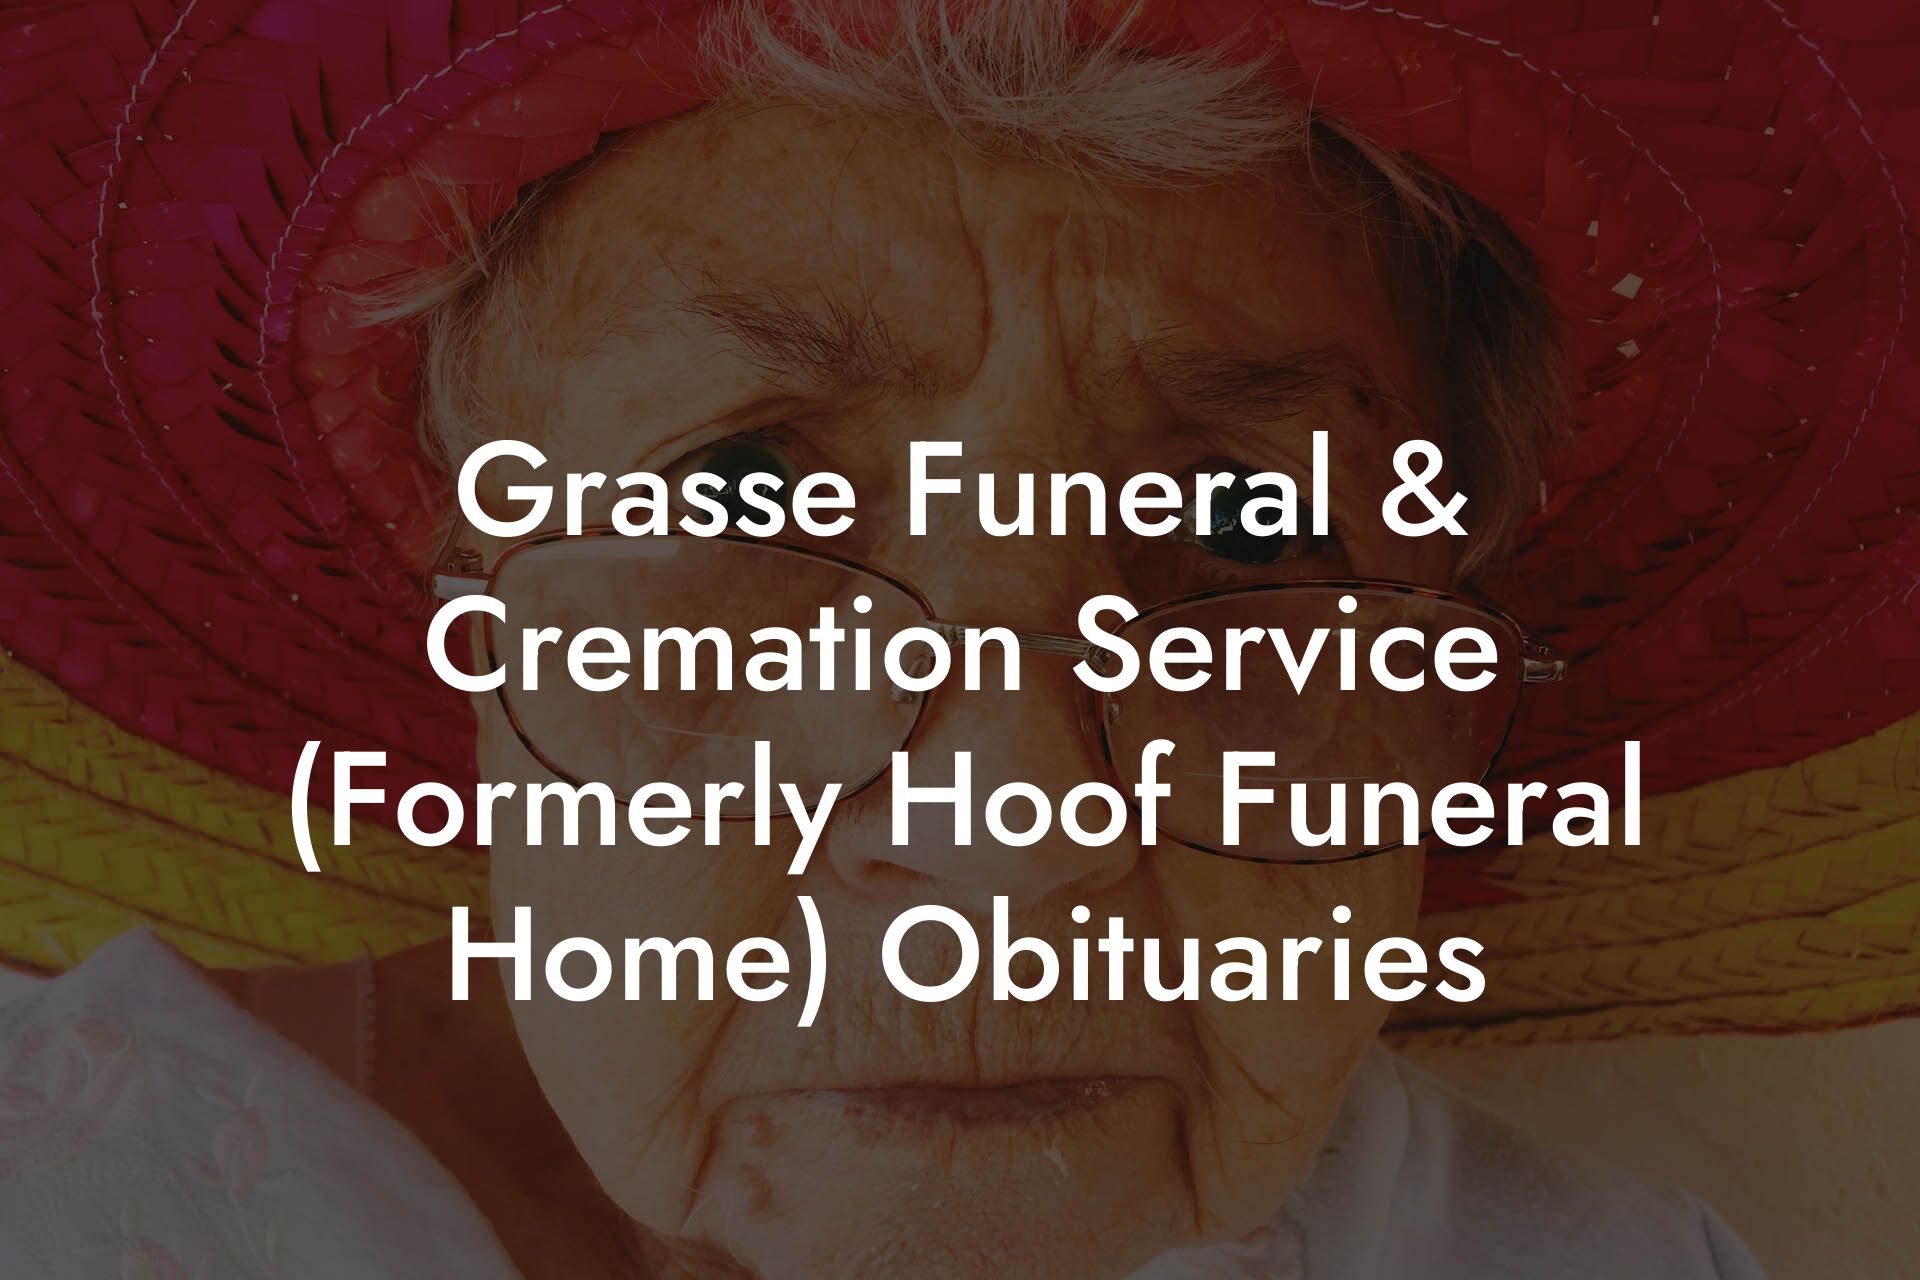 Grasse Funeral & Cremation Service (Formerly Hoof Funeral Home) Obituaries